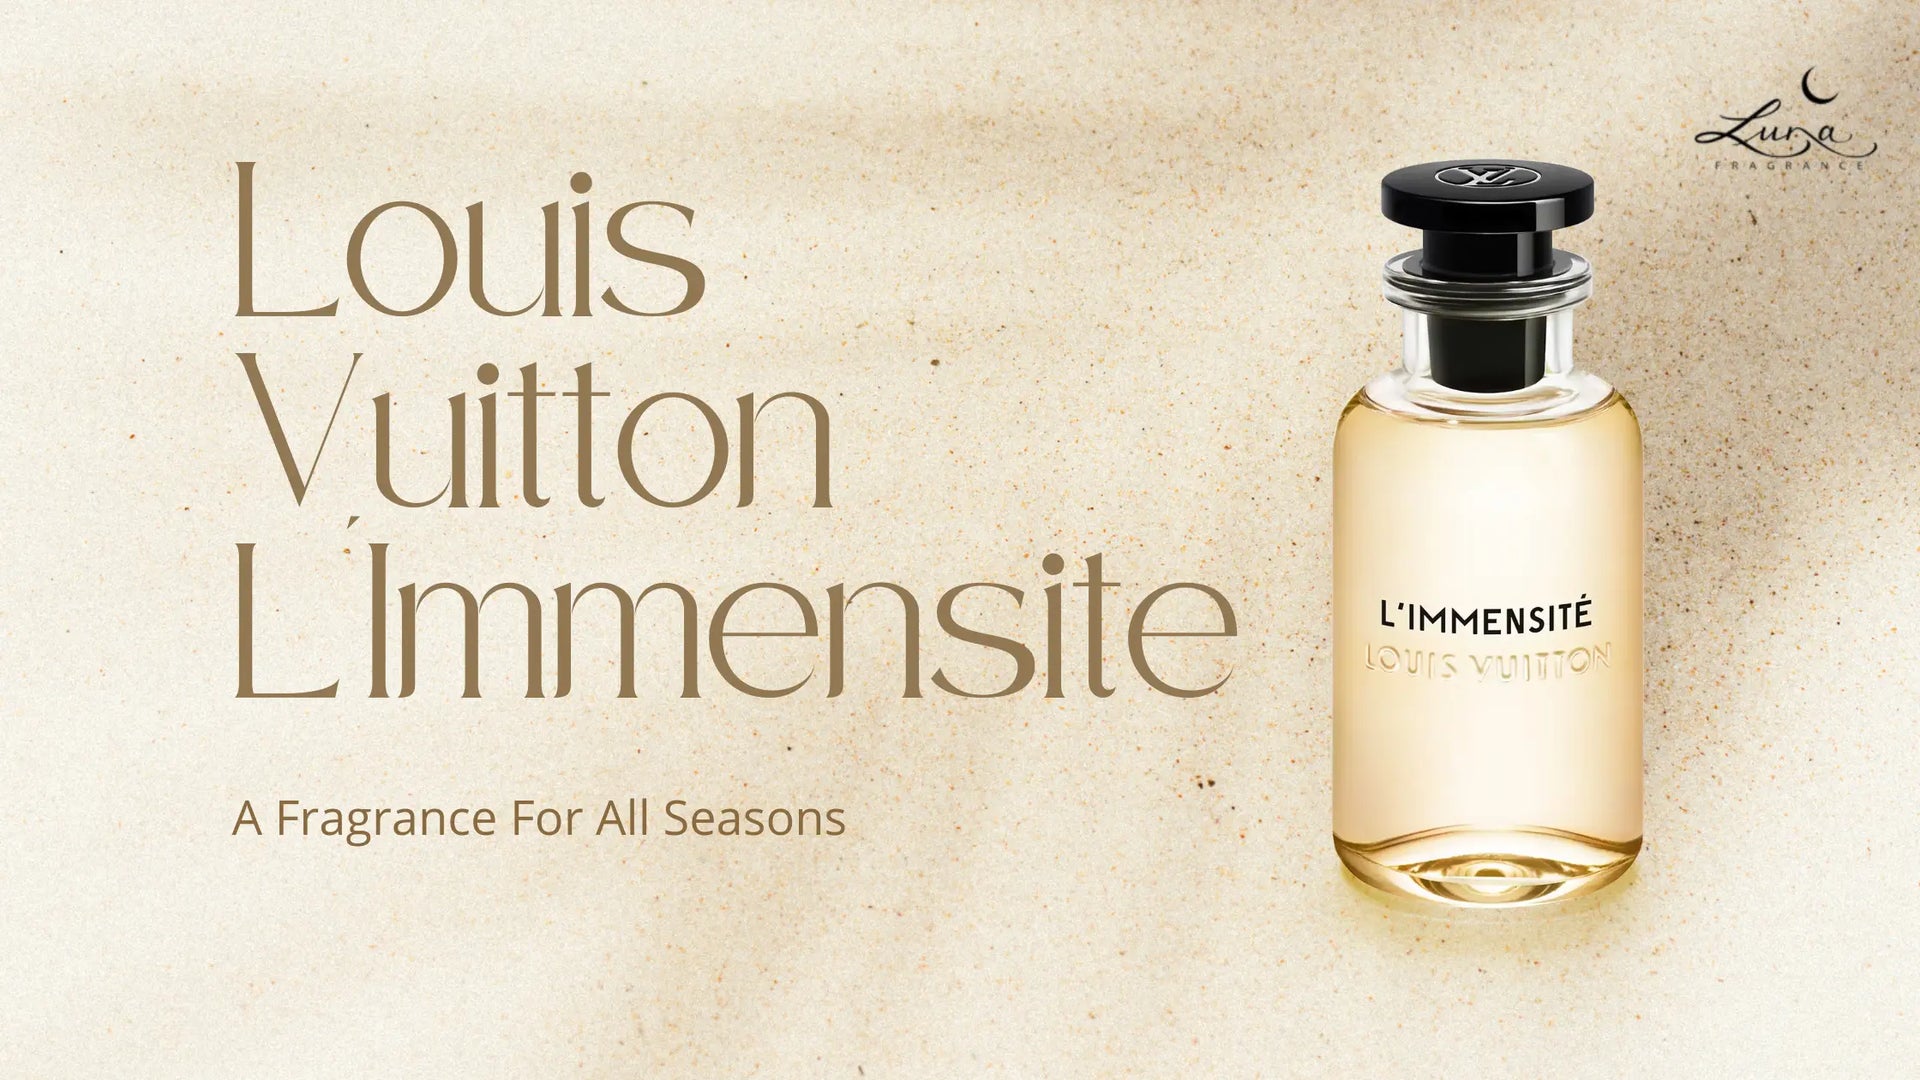 FREE SHIPPING Perfume Louis vuitton l'immensite Perfume Tester new